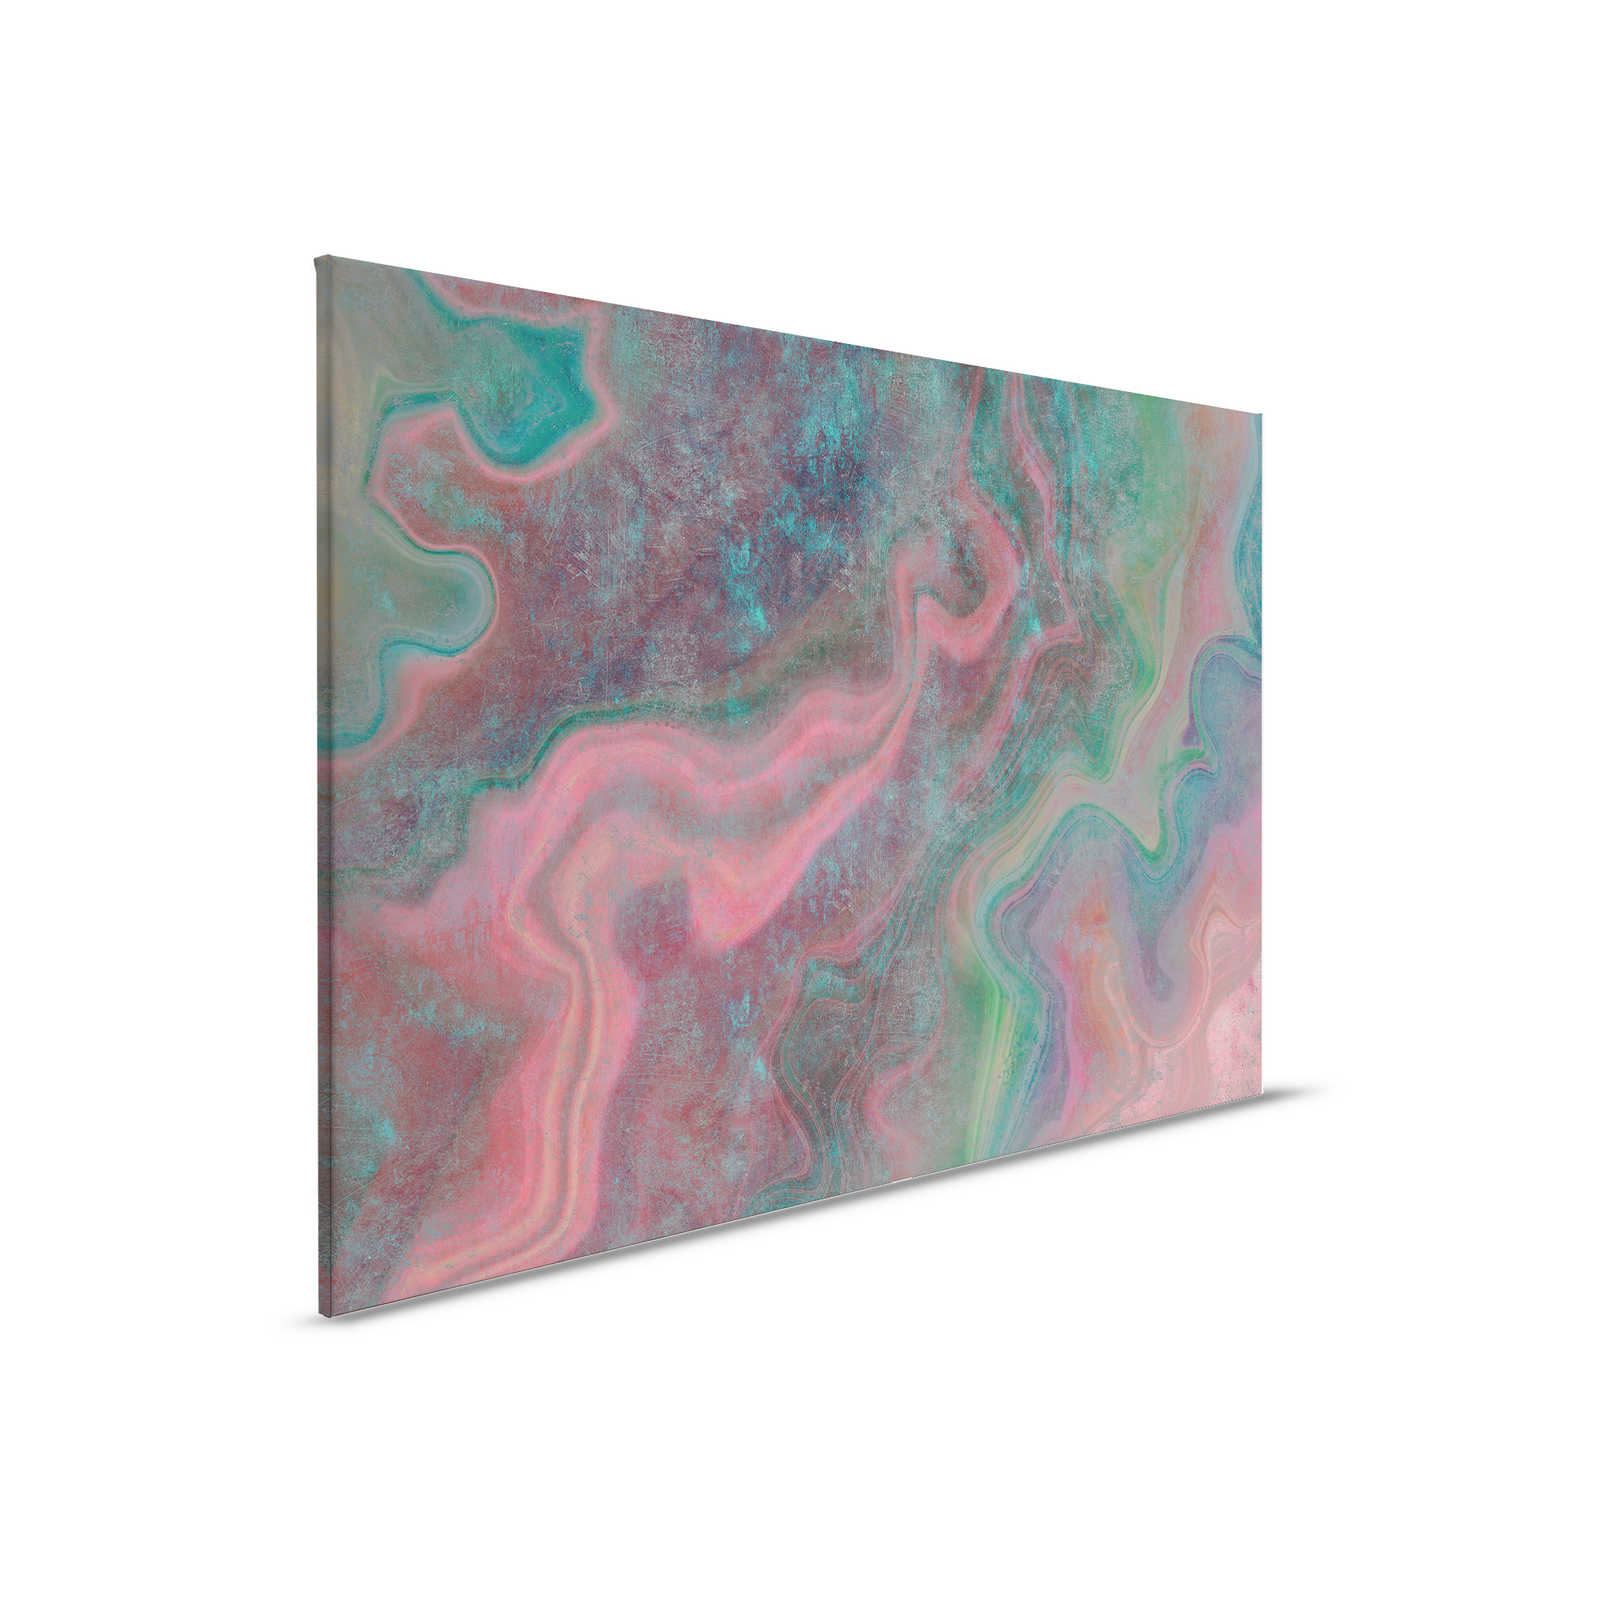         Marble 1 - Colourful marble as a highlight canvas picture with scratch structure - 0.90 m x 0.60 m
    